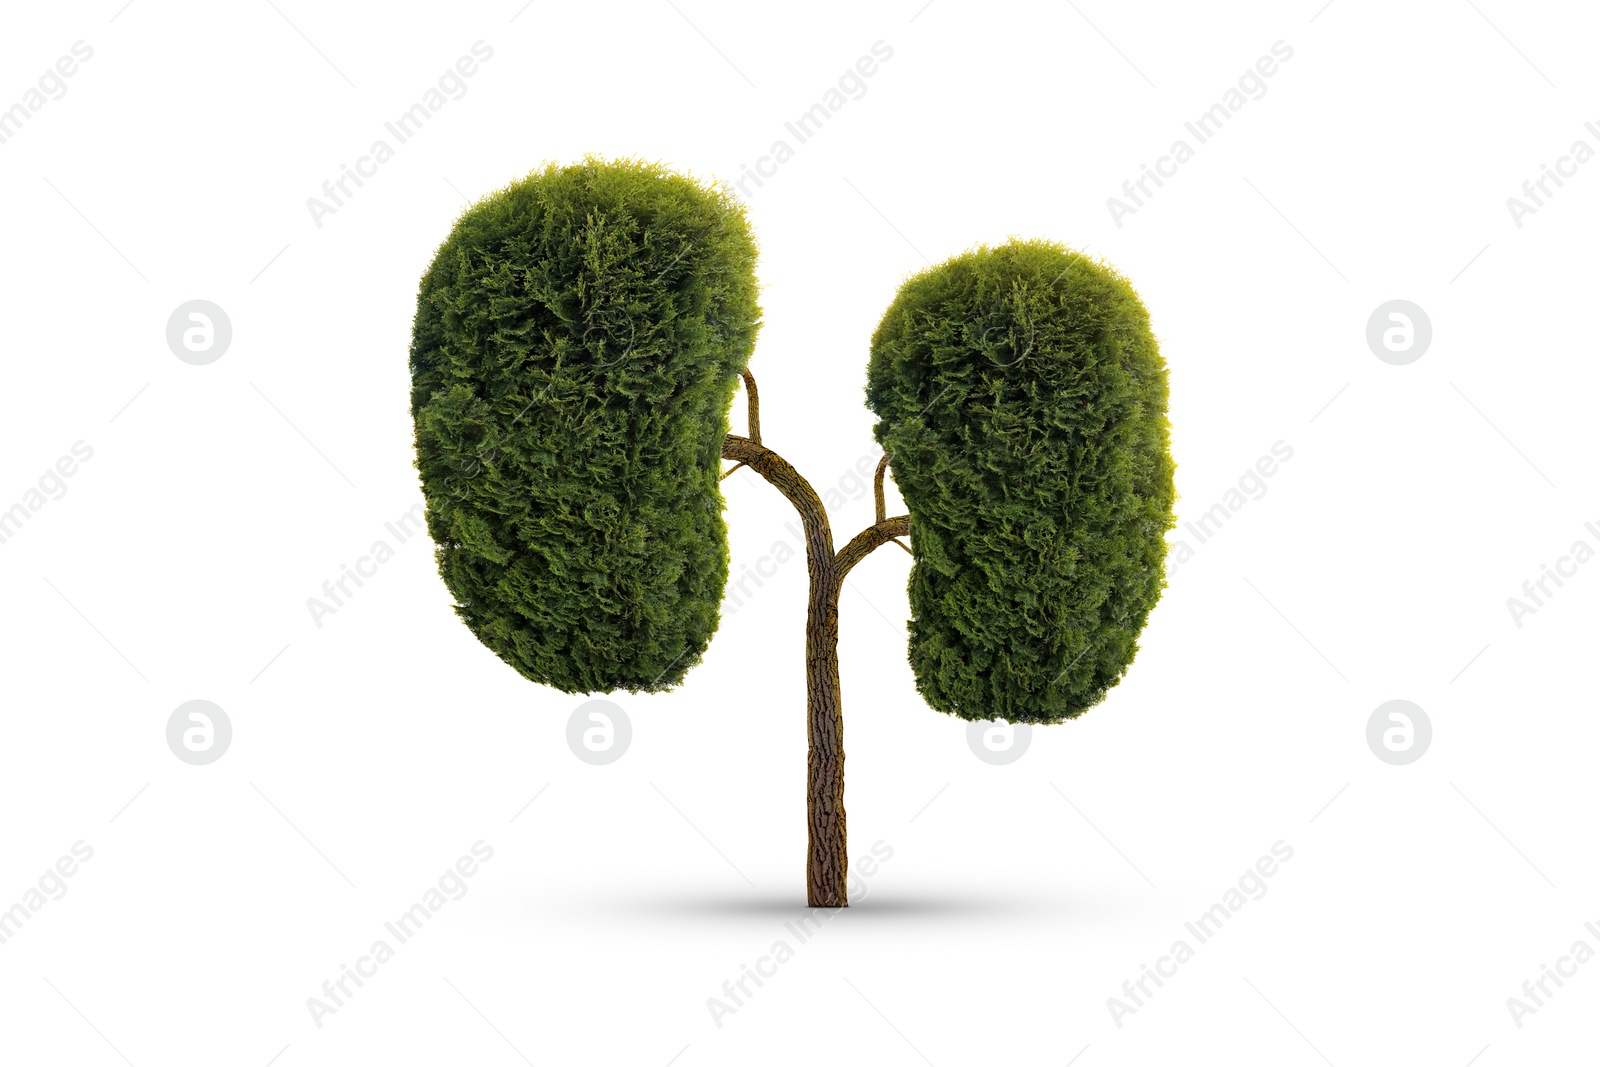 Image of Human kidneys model made of trees with green leaves on white background. Health care concept